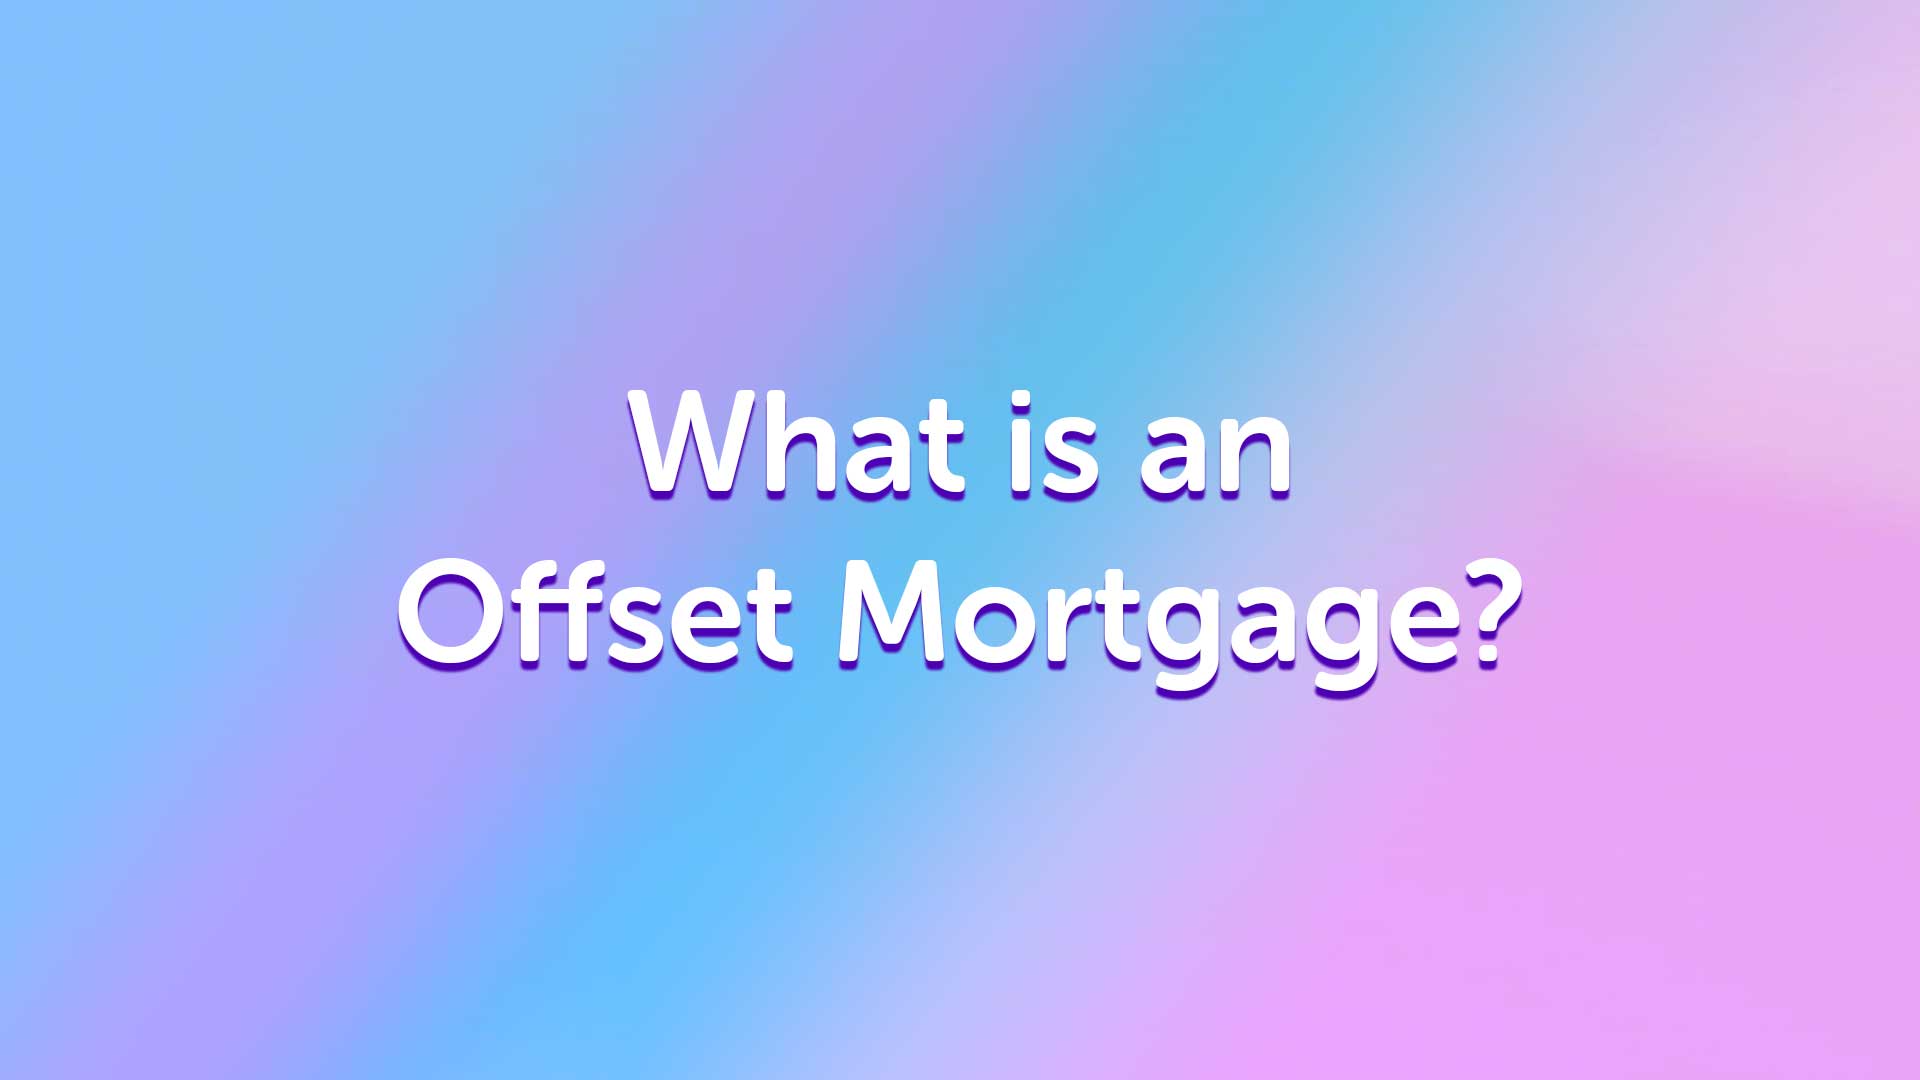 what is an offset mortgage in cardiff | cardiffmoneyman